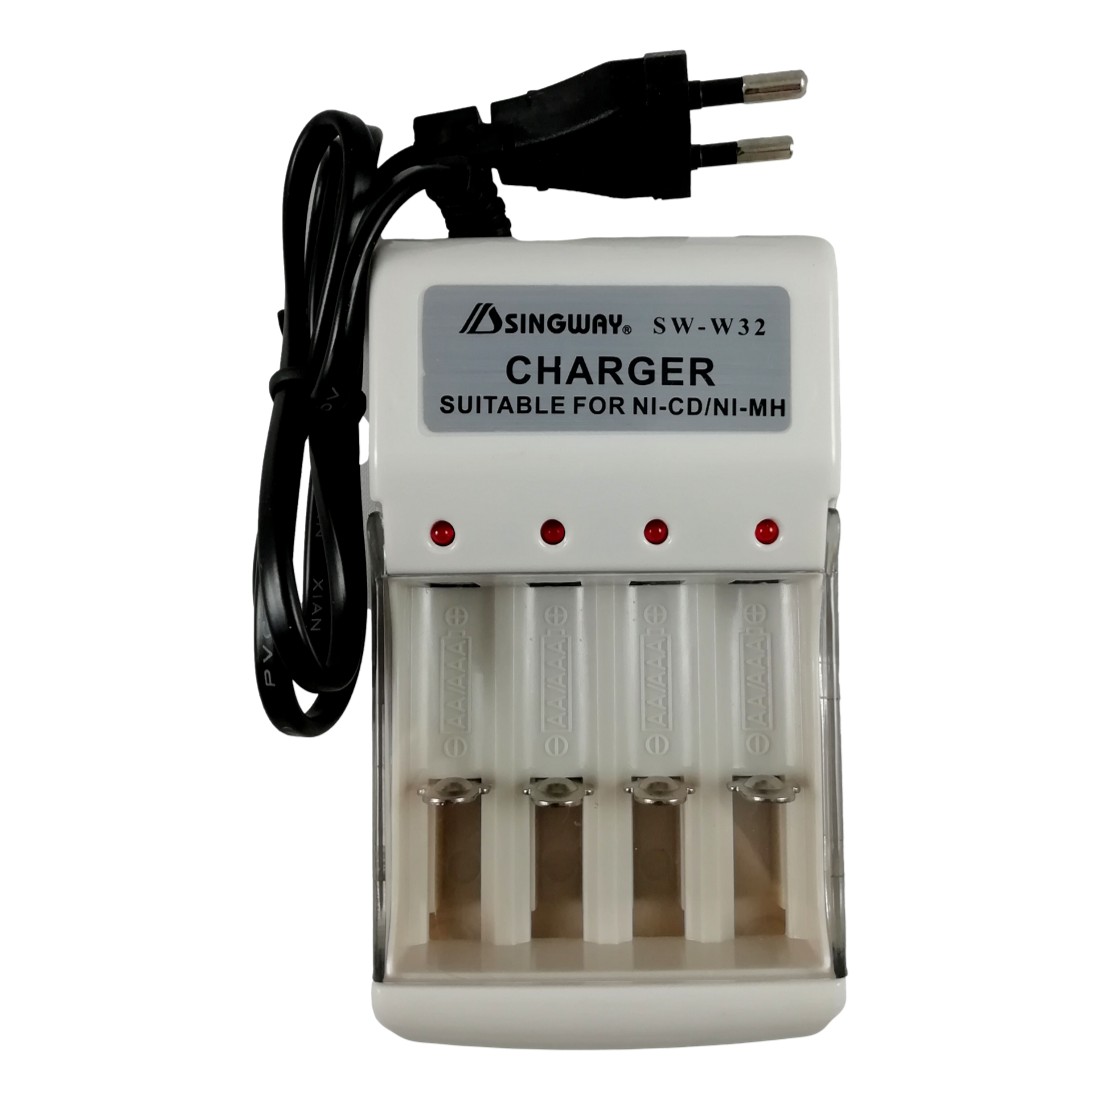 Chargeur Piles Batteries Rechargeables AA LR03 et AAA LR6 NI-MH NI-CD Singway